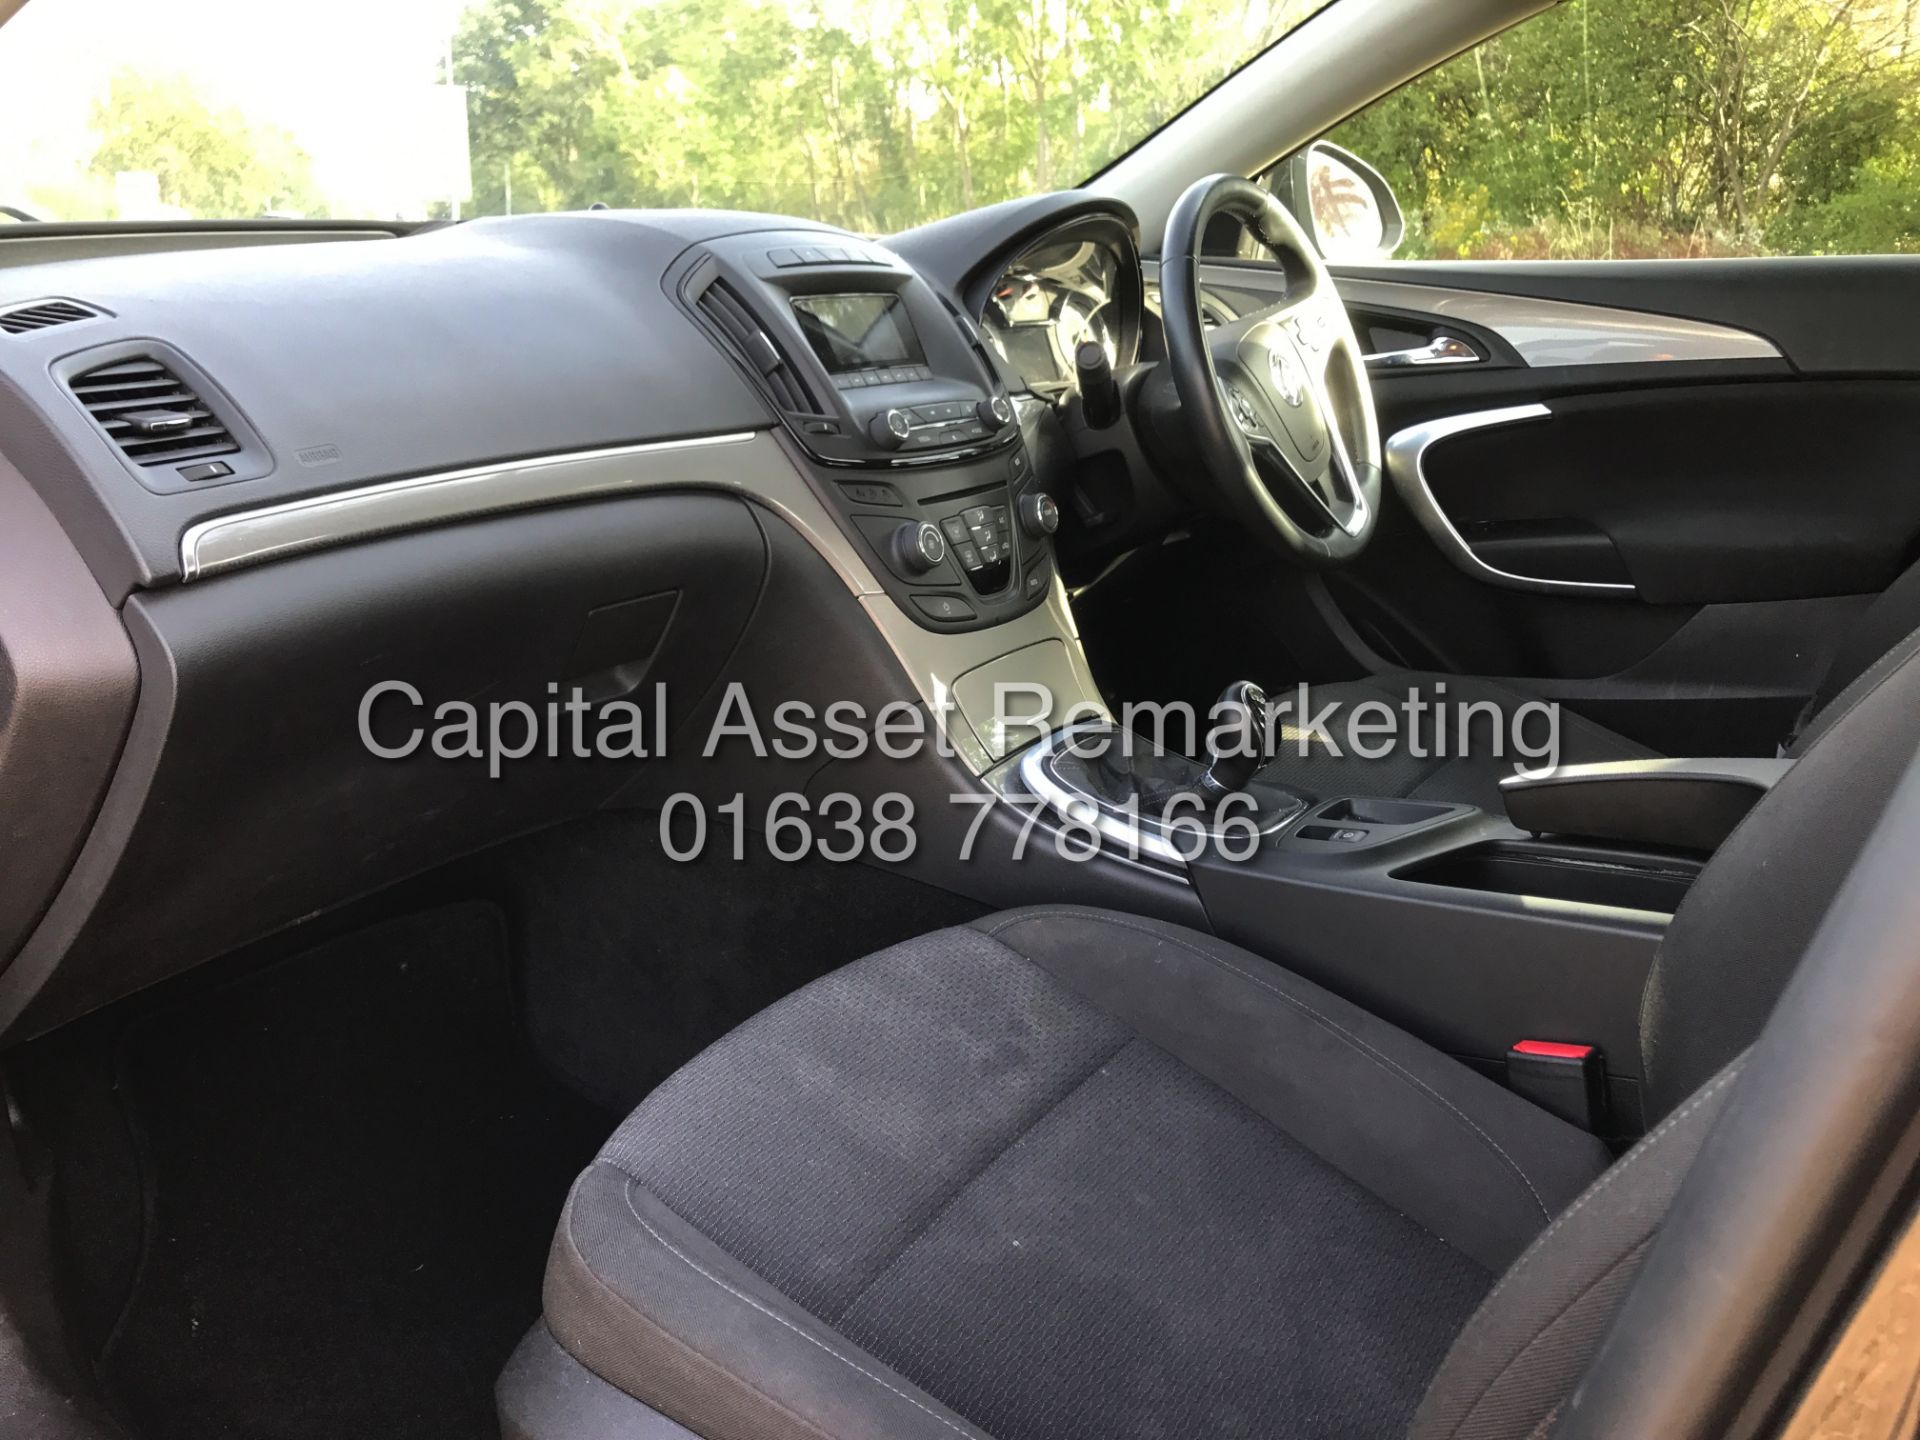 On Sale VAUXHALL INSIGNIA 2.0CDTI "DESIGN" 6 SPEED (2014 MODEL-NEW SHAPE) AIR CON -ELEC PACK -CRUISE - Image 14 of 22